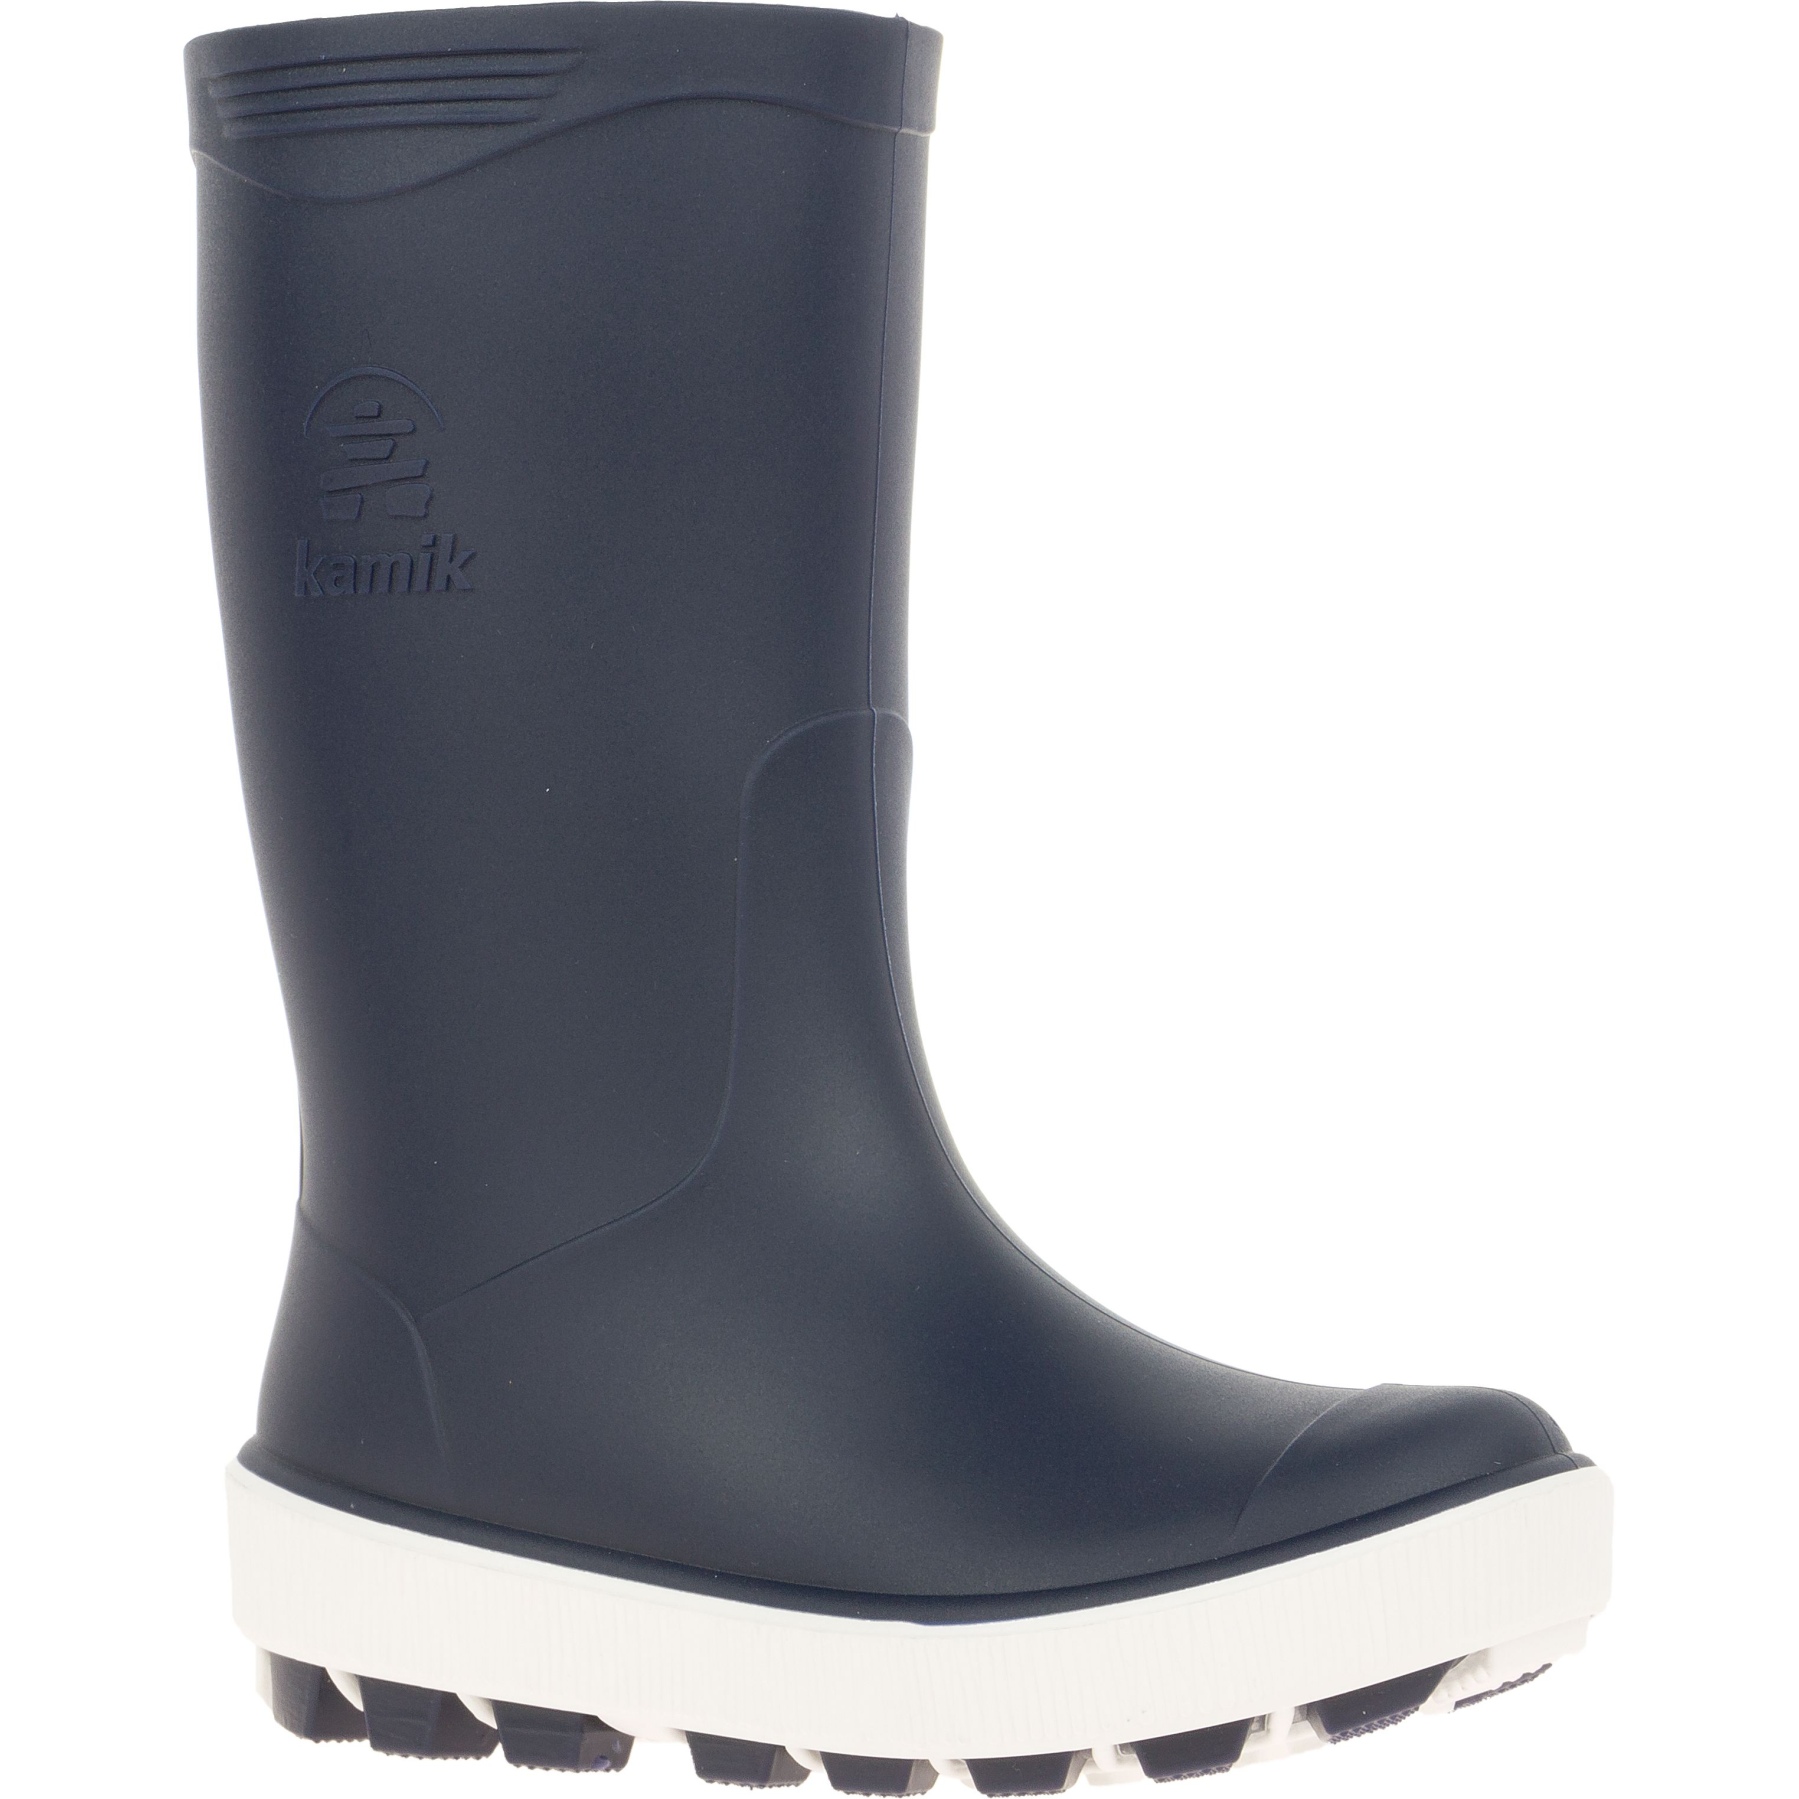 Image of Kamik Riptide Rubber Boots - Navy White